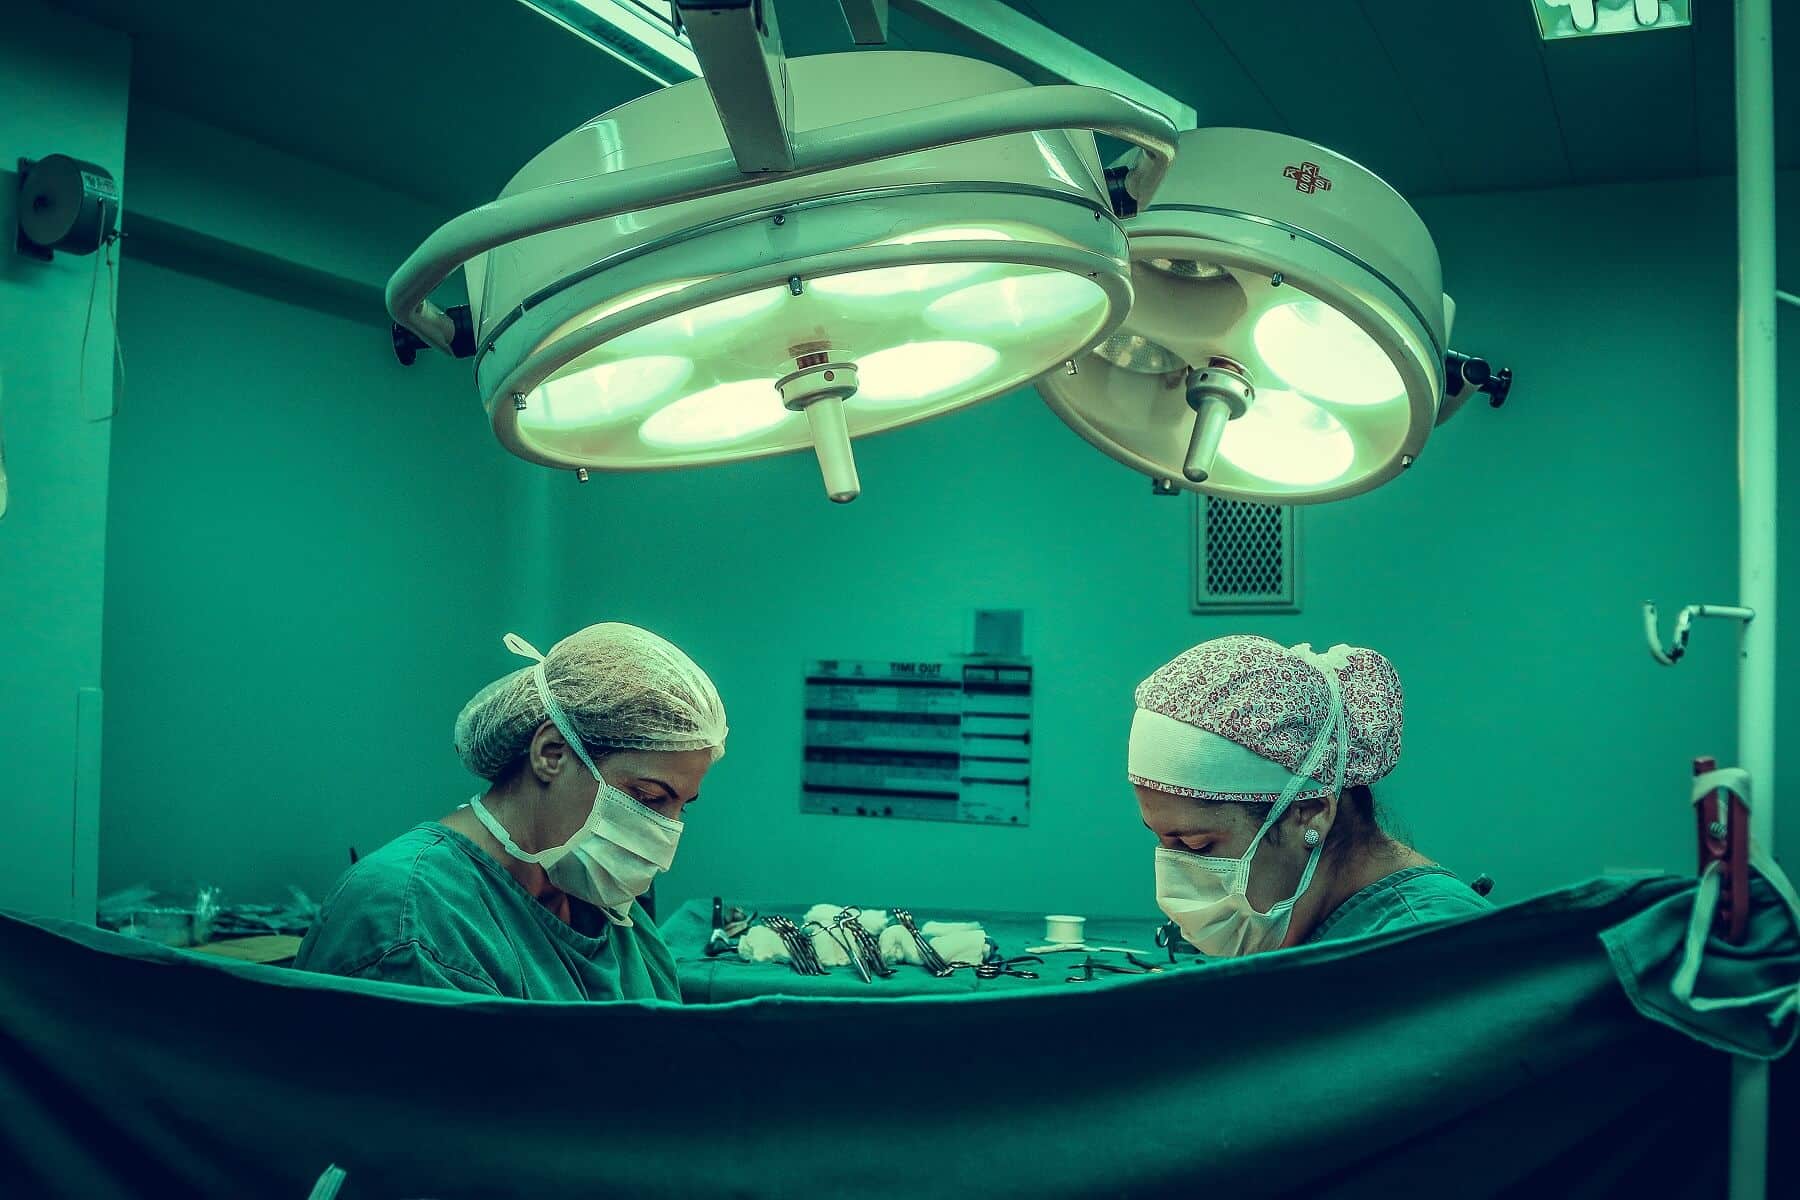 Surgeons In Operating Room